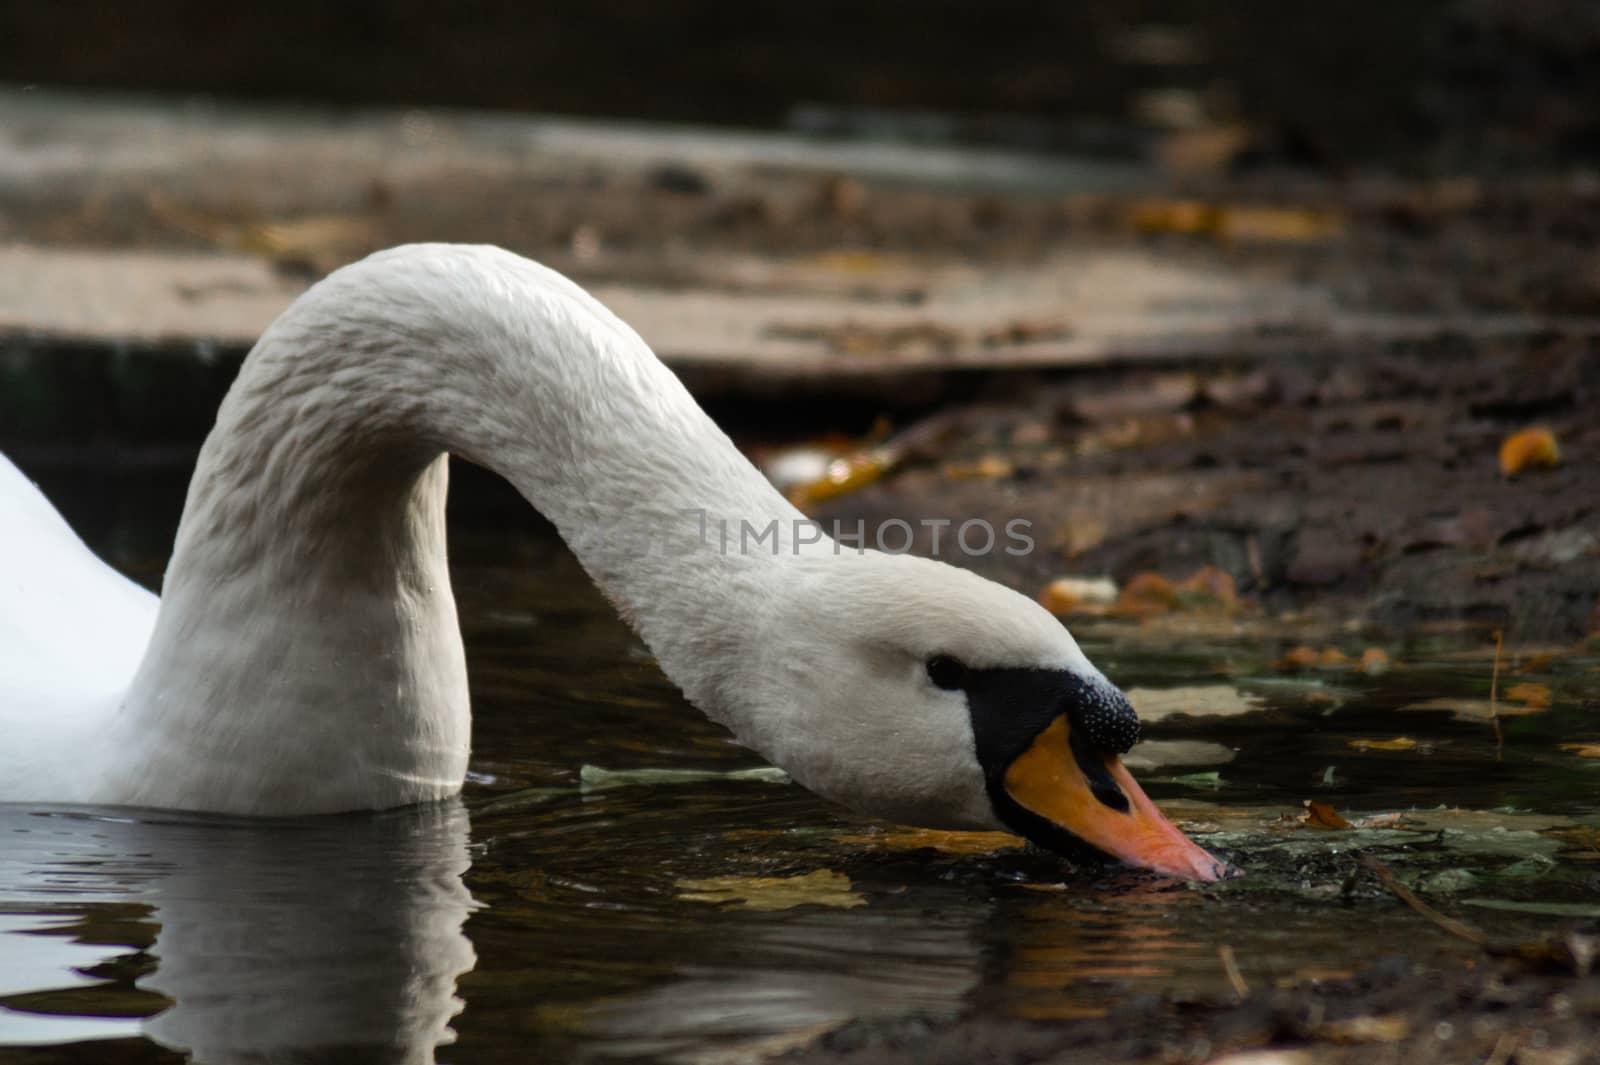 White swan with long neck eating in lake on autumn forest park. Closeup view with blurred background.